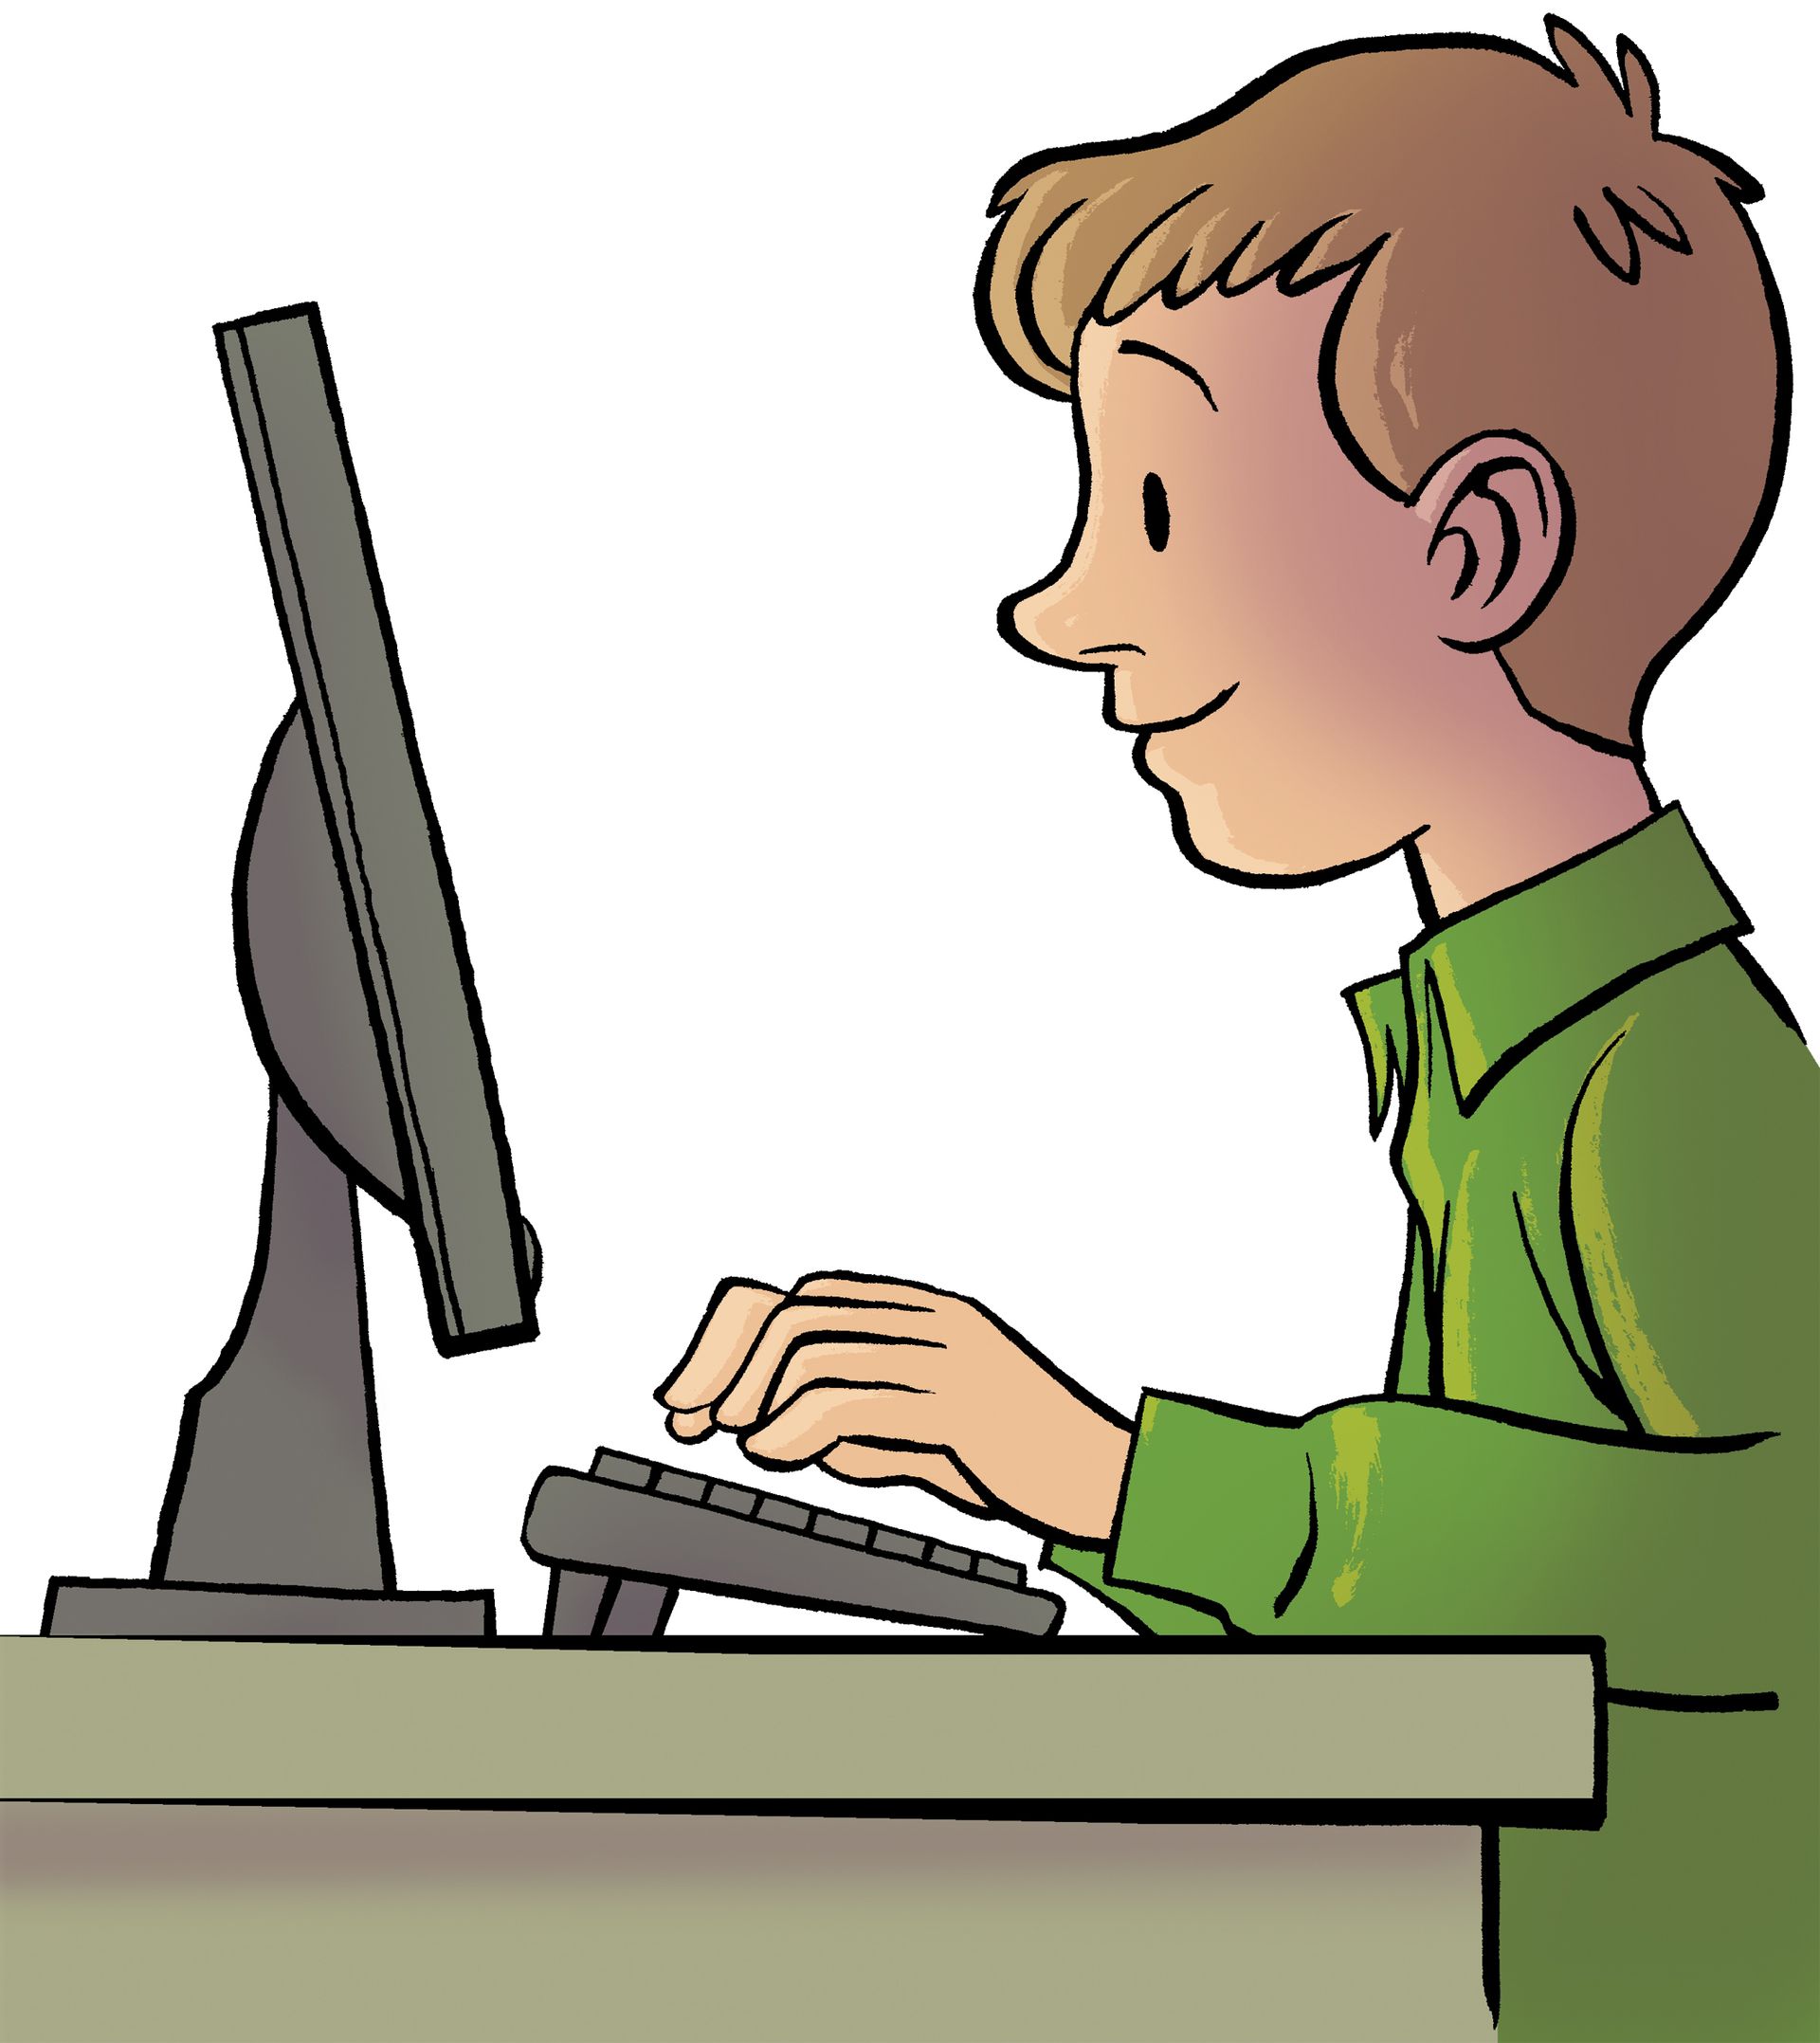 A boy sits and types at his computer.